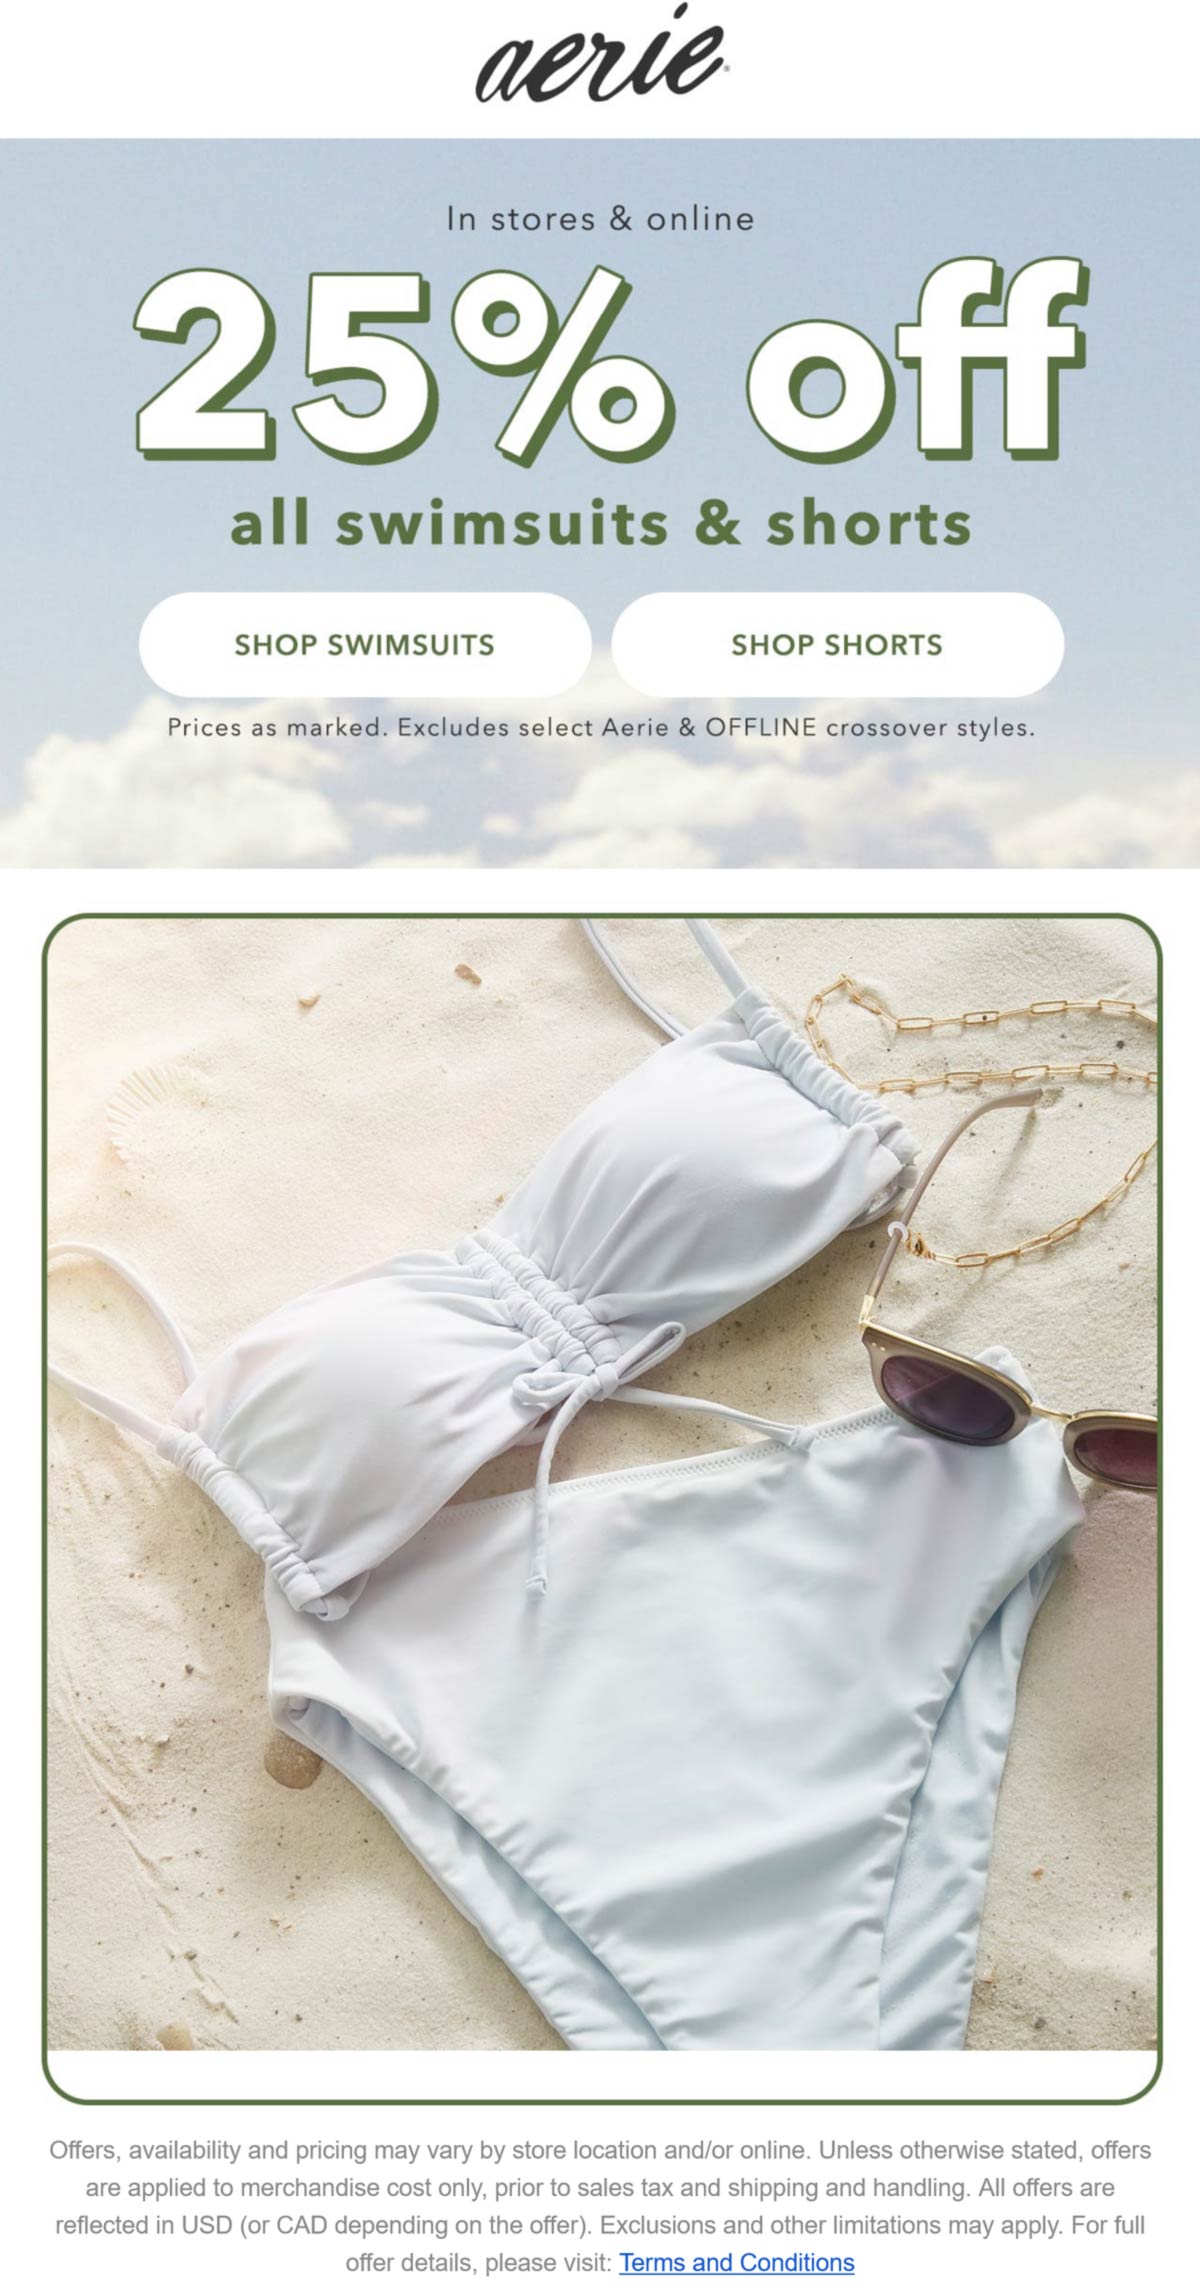 Aerie stores Coupon  25% off all swimsuits & shorts at Aerie, ditto online #aerie 